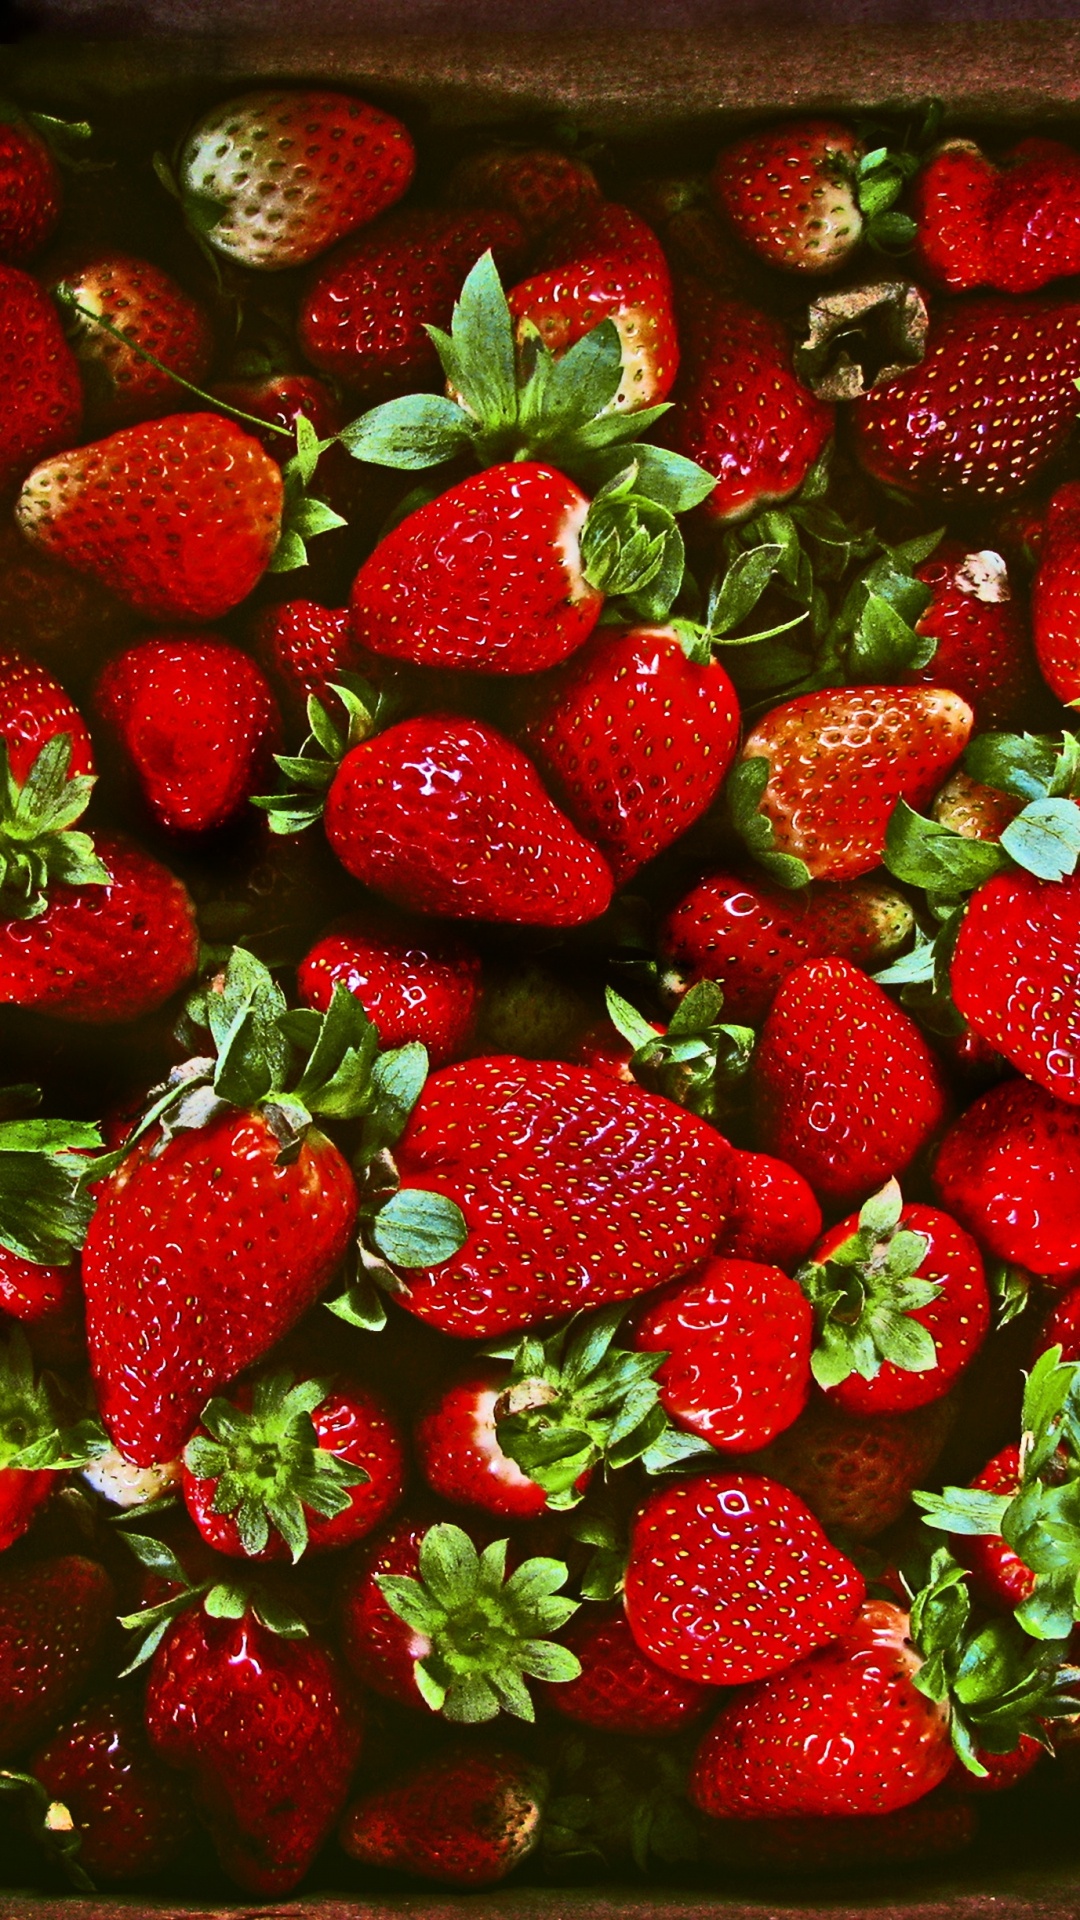 Strawberries in Brown Wooden Container. Wallpaper in 1080x1920 Resolution